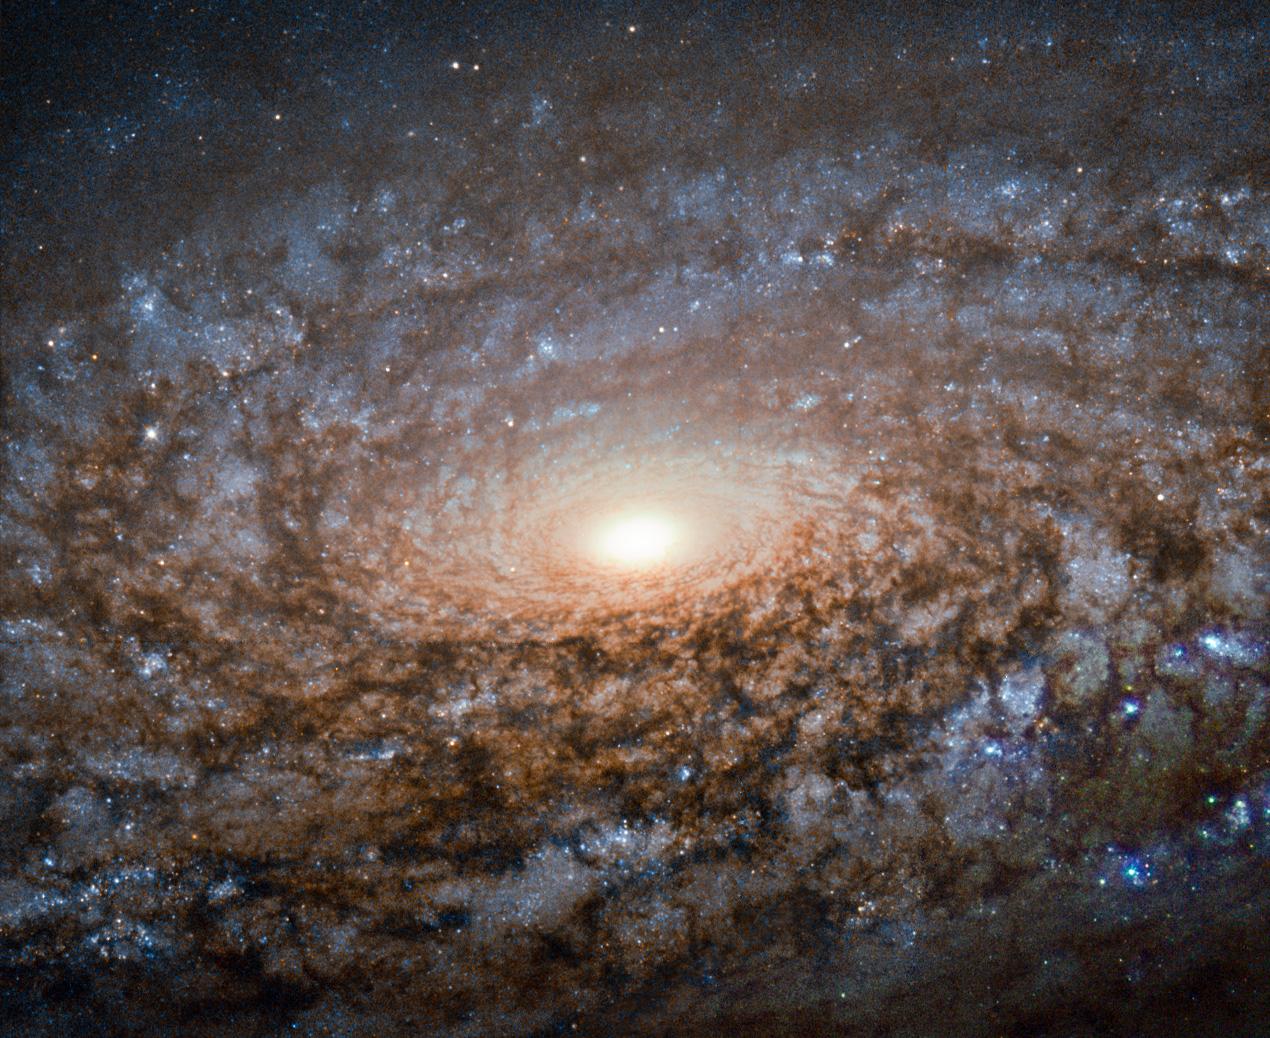 Large spiral of dust and gas orbiting bright white center of this galaxy image. The spiral is dusty and dark brown with dark blue interspersed.